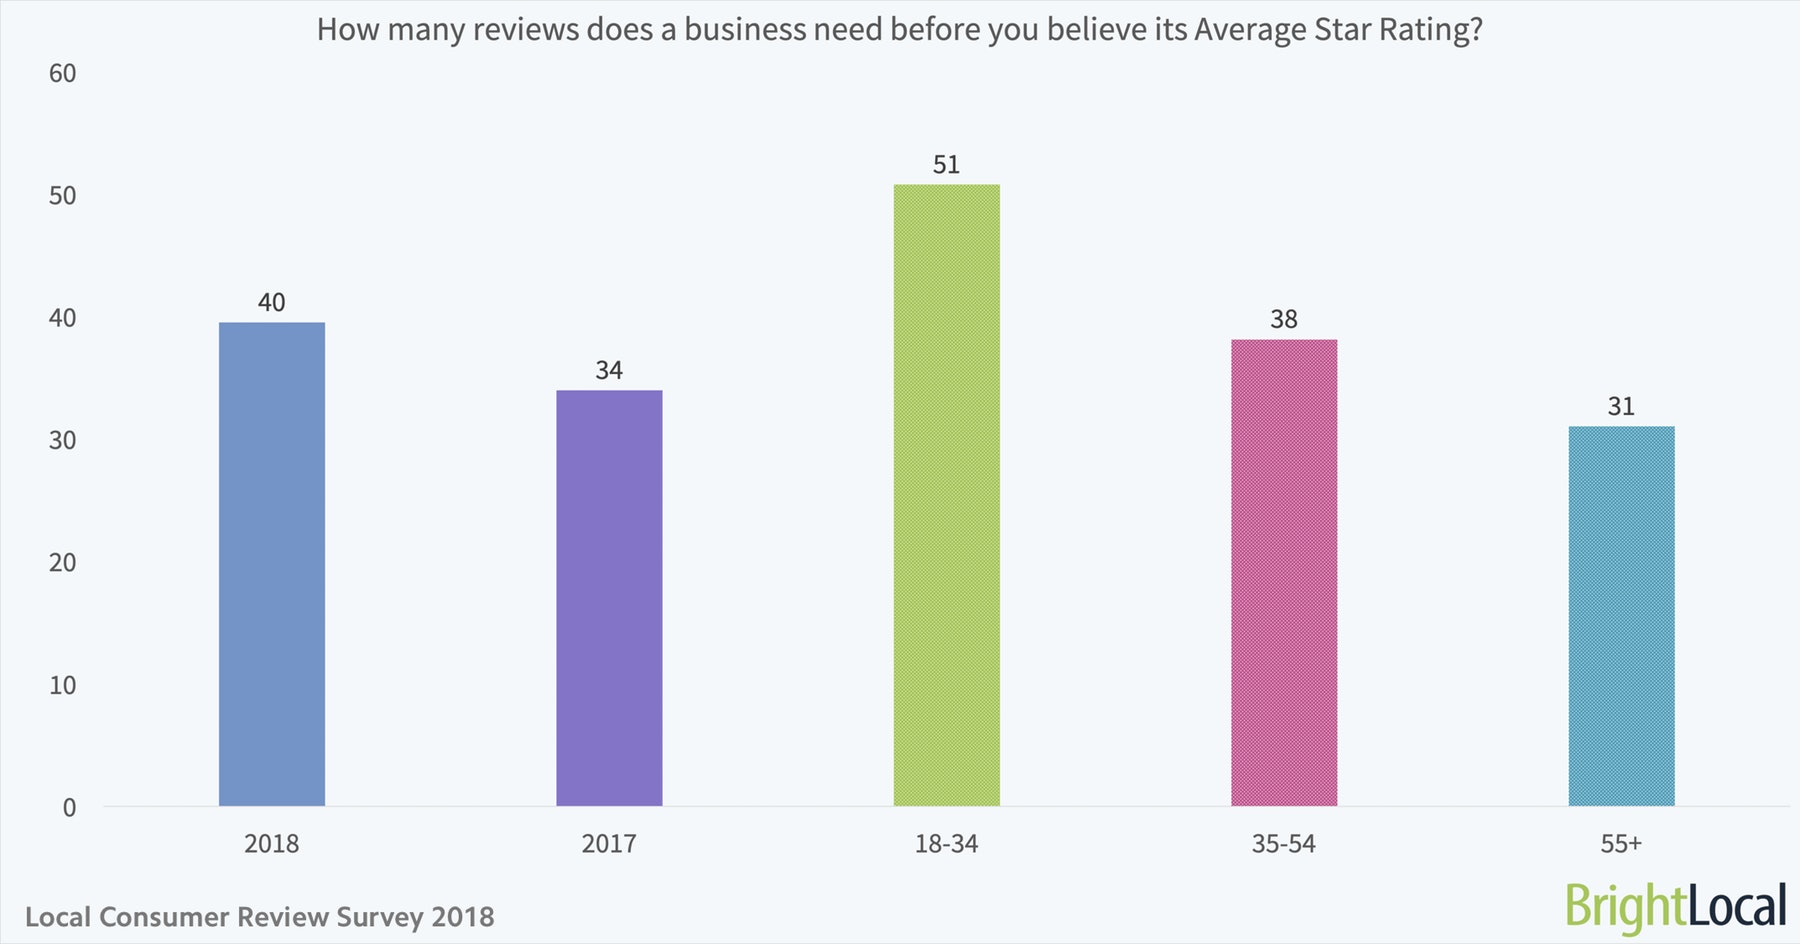 How many reviews does a business need before you believe its average star rating